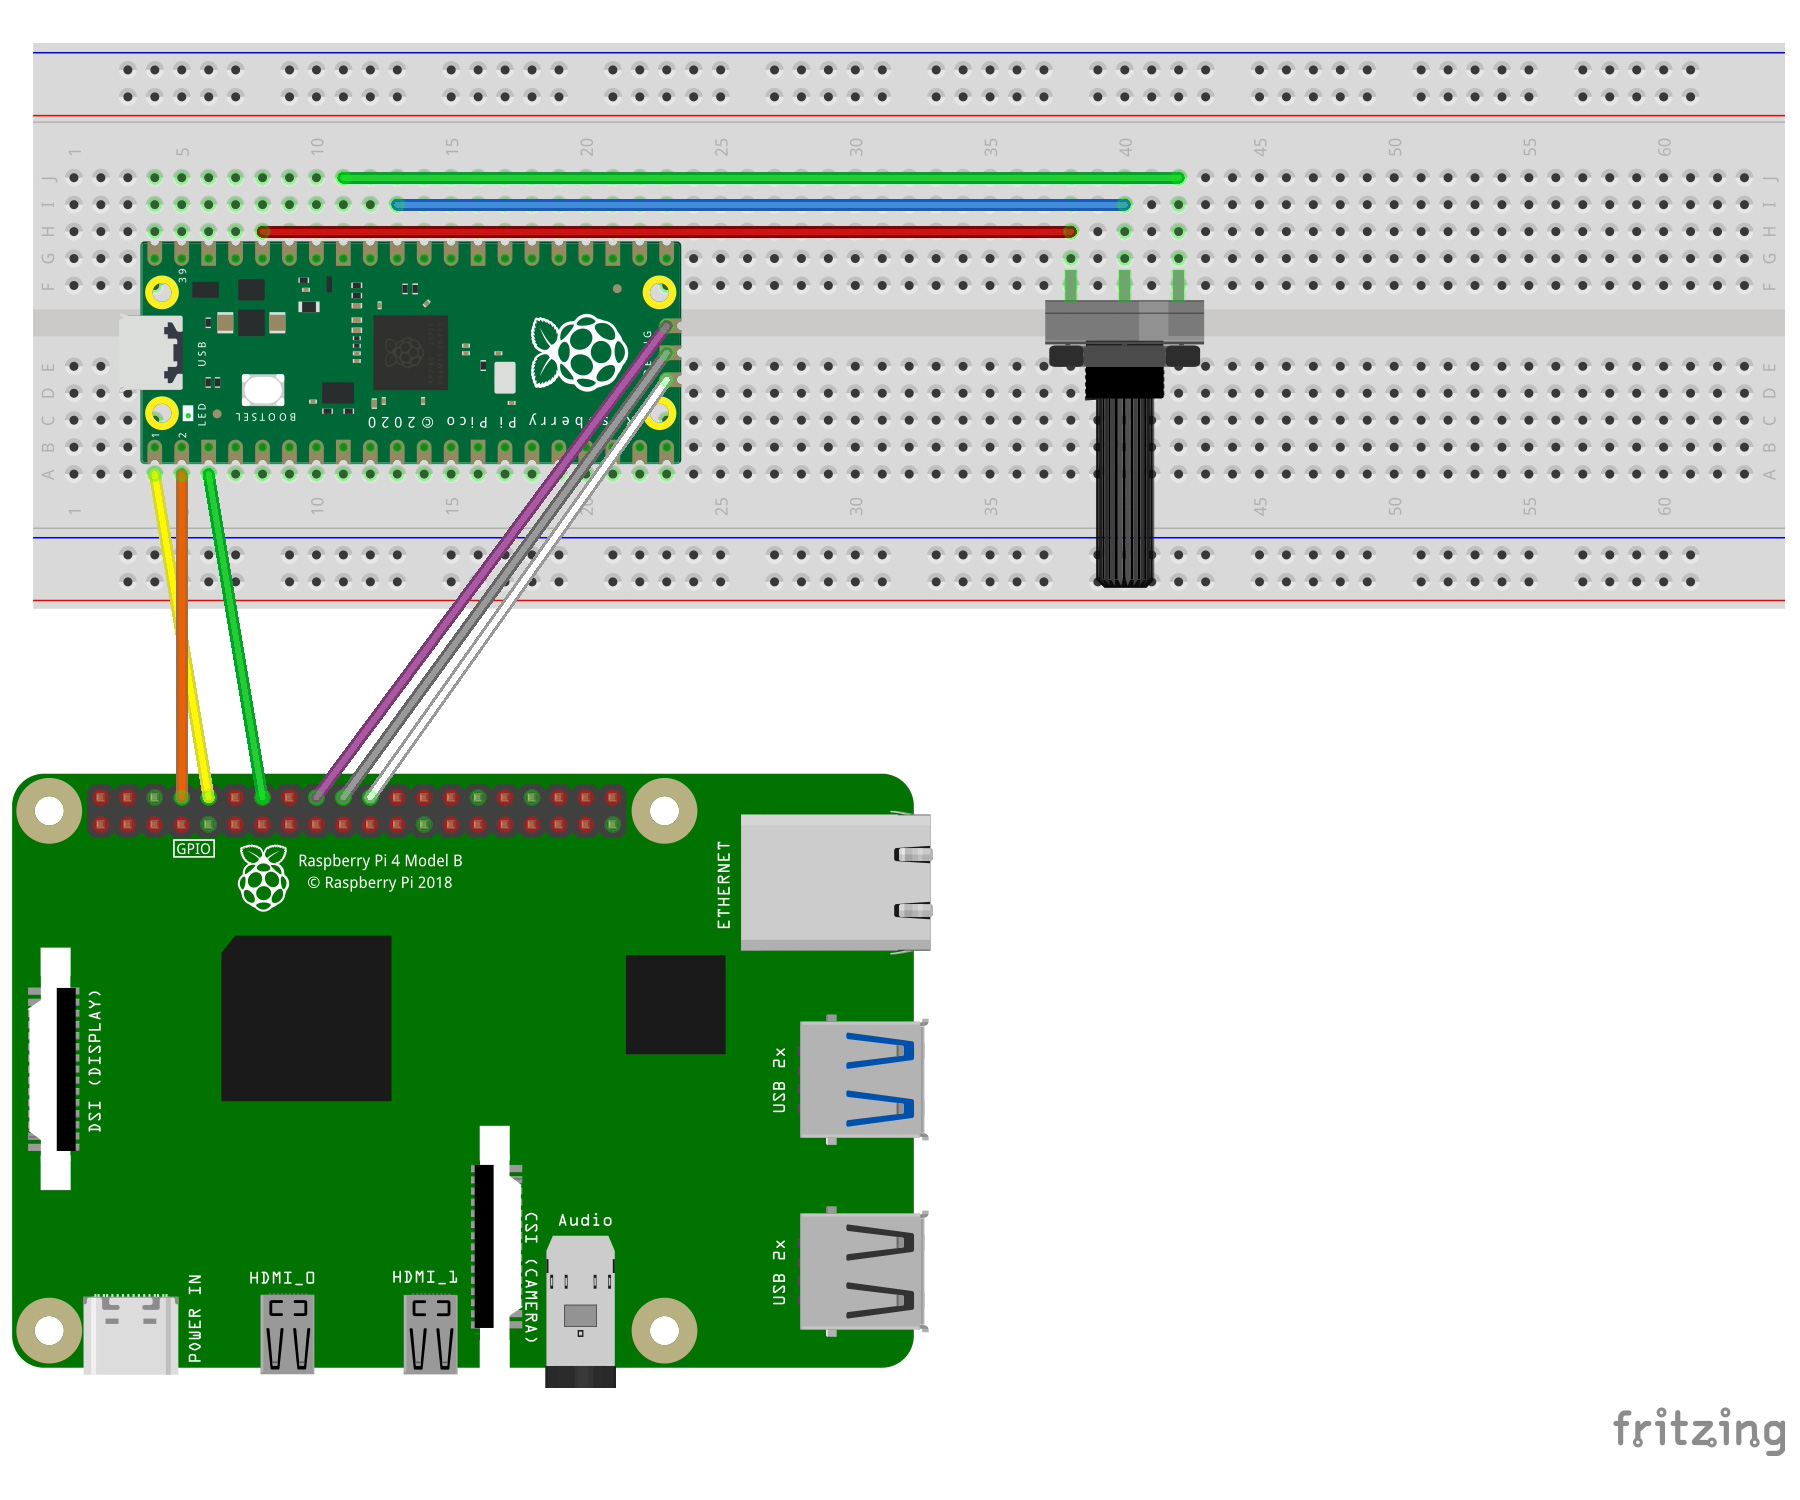 raspberry-pi-pico-get-started-with-c-c++-circuit